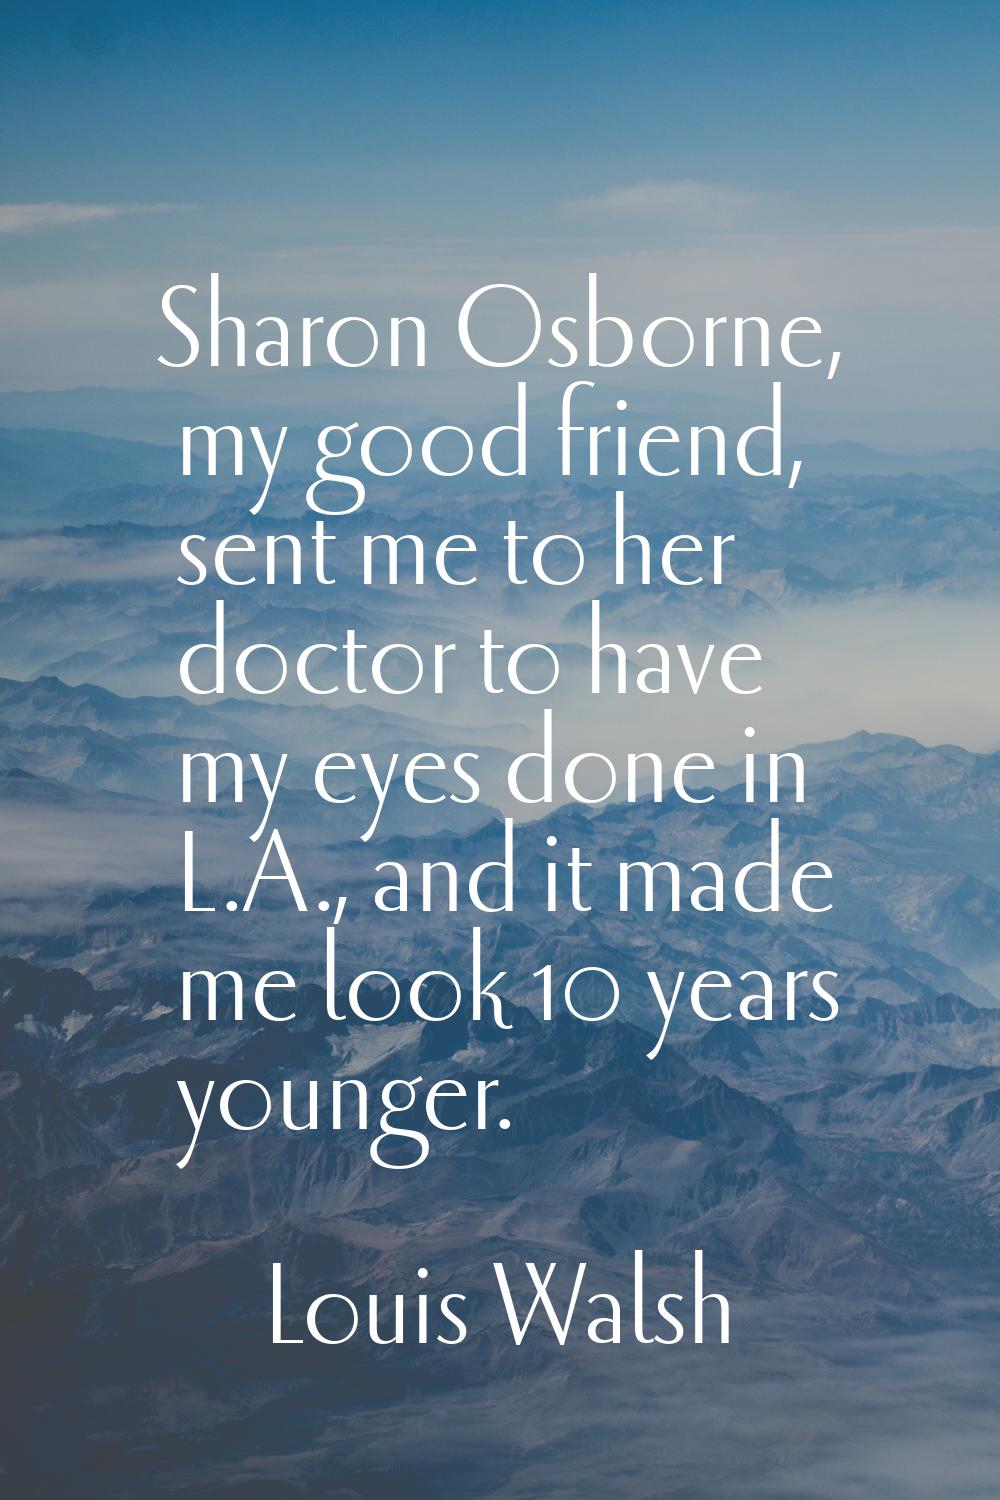 Sharon Osborne, my good friend, sent me to her doctor to have my eyes done in L.A., and it made me 